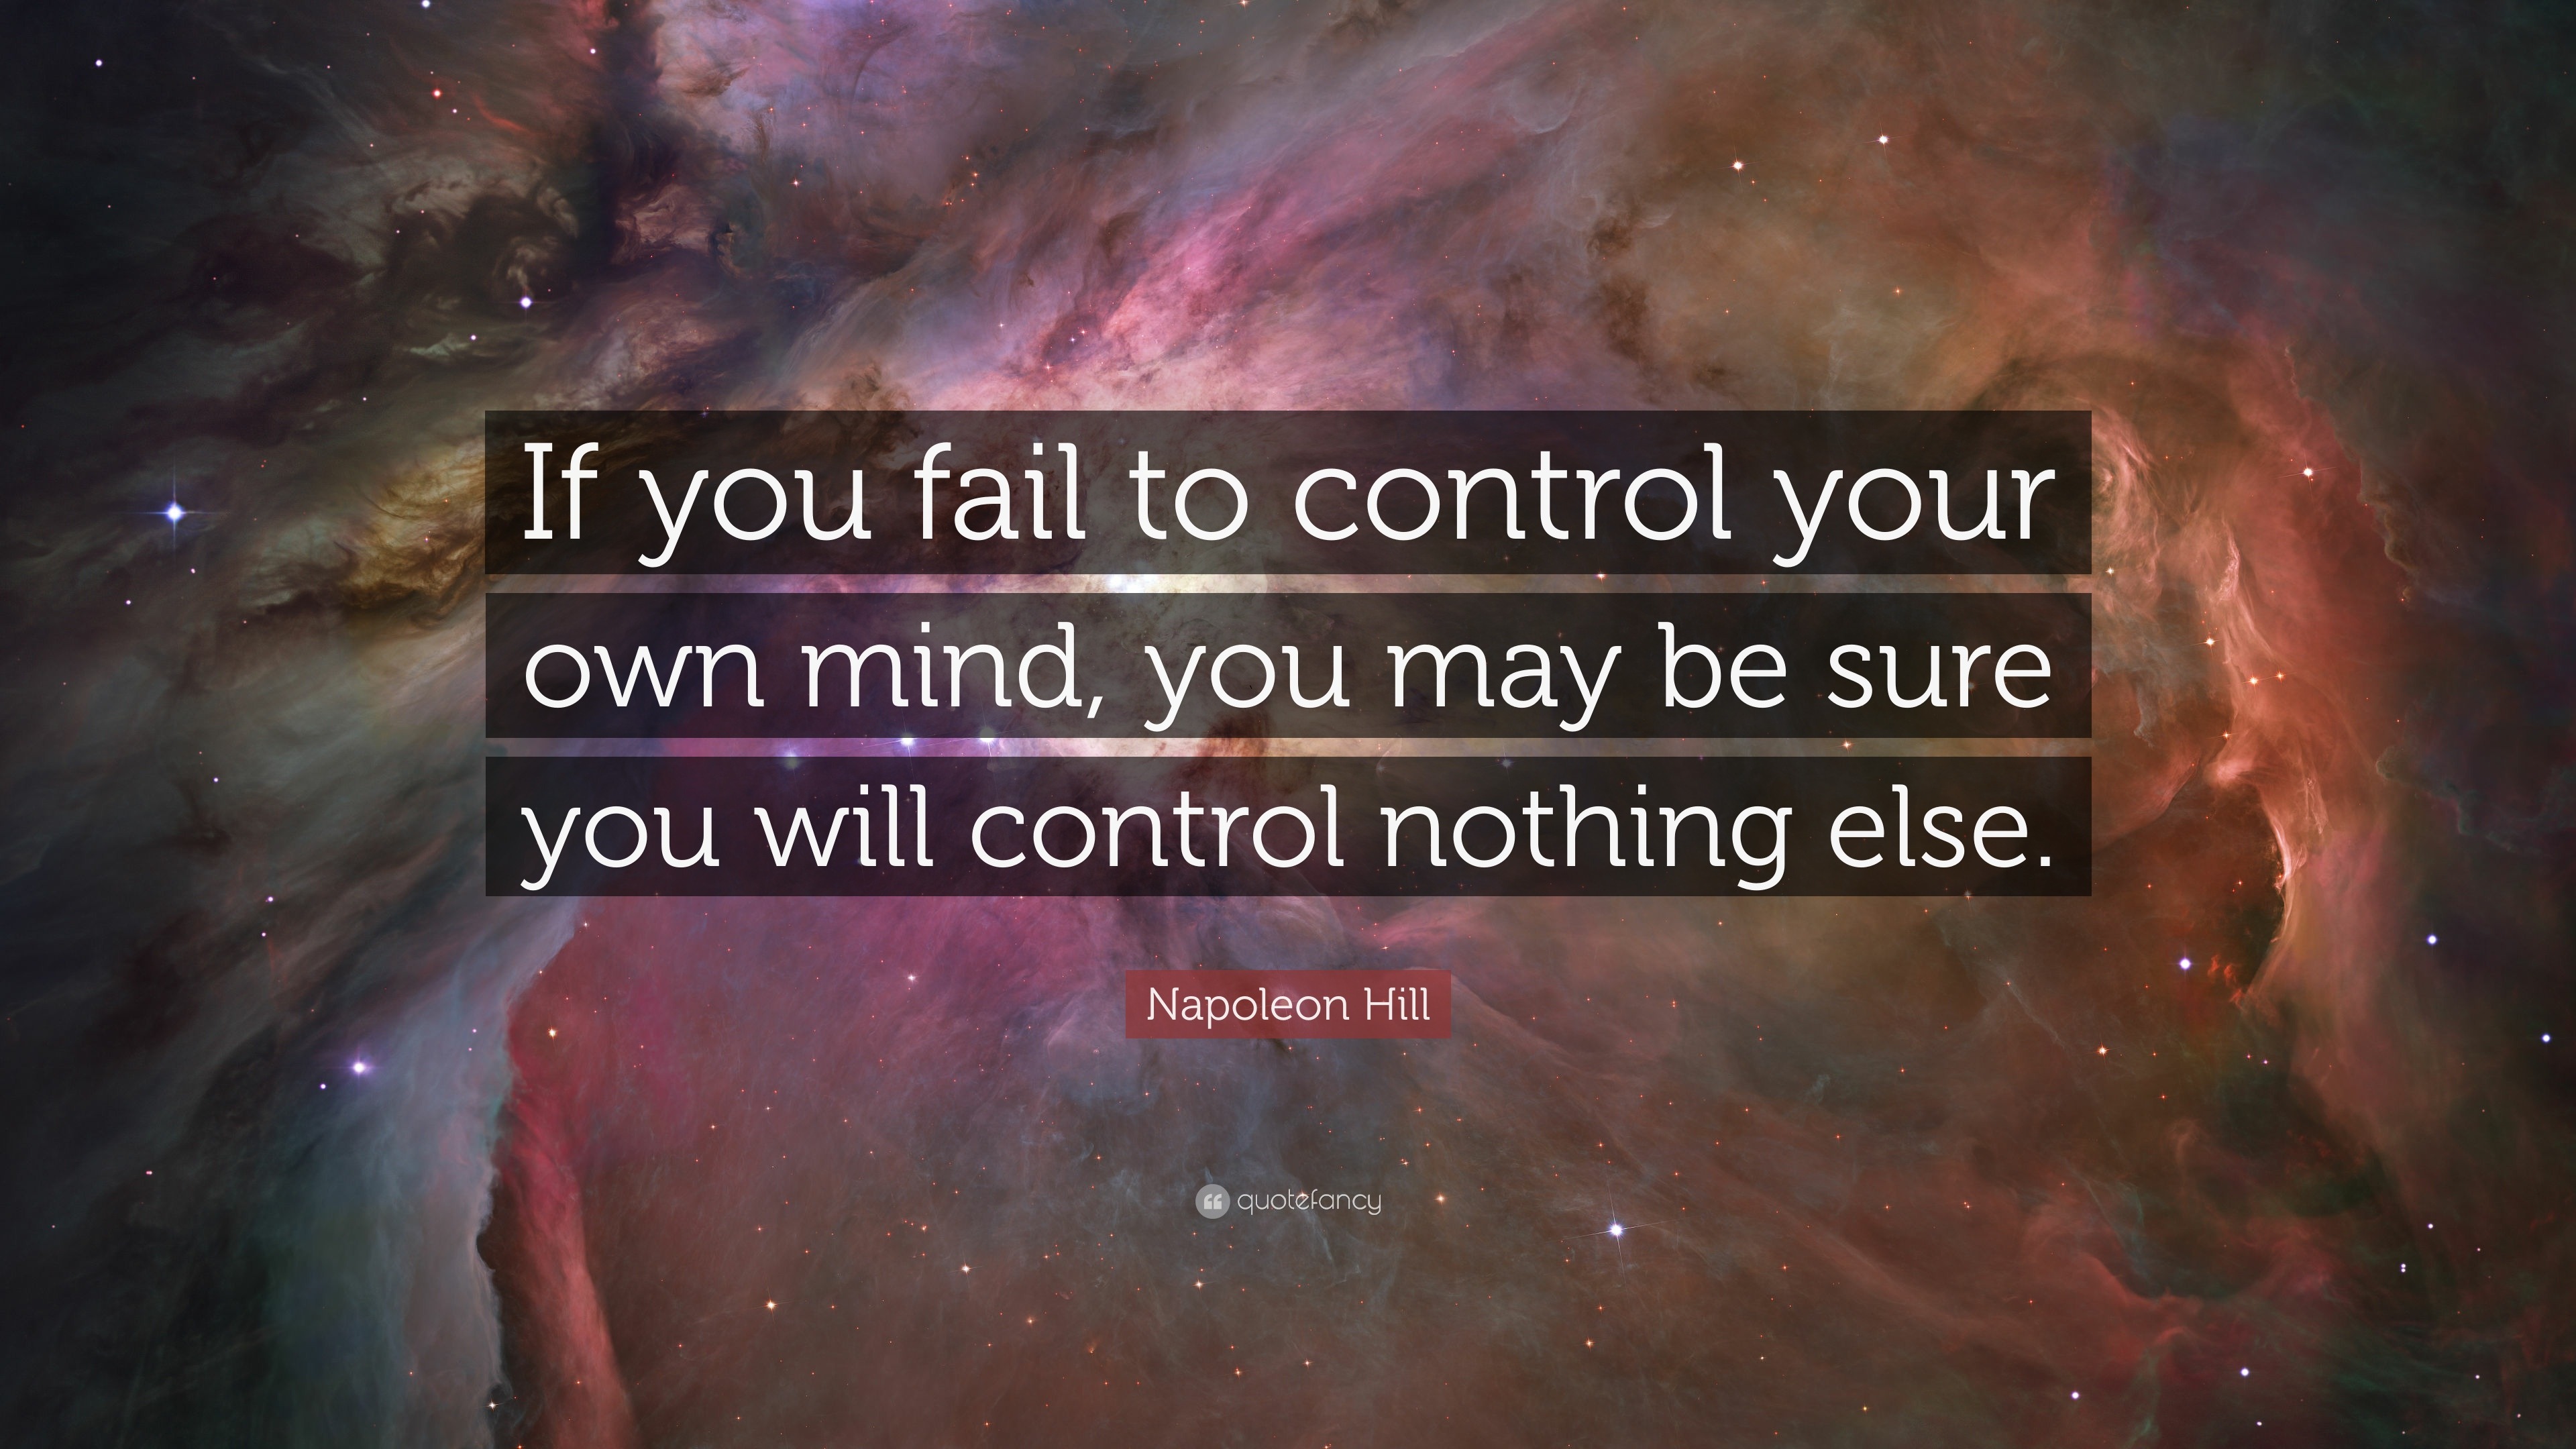 Napoleon Hill Quote: “If you fail to control your own mind, you may be sure  you